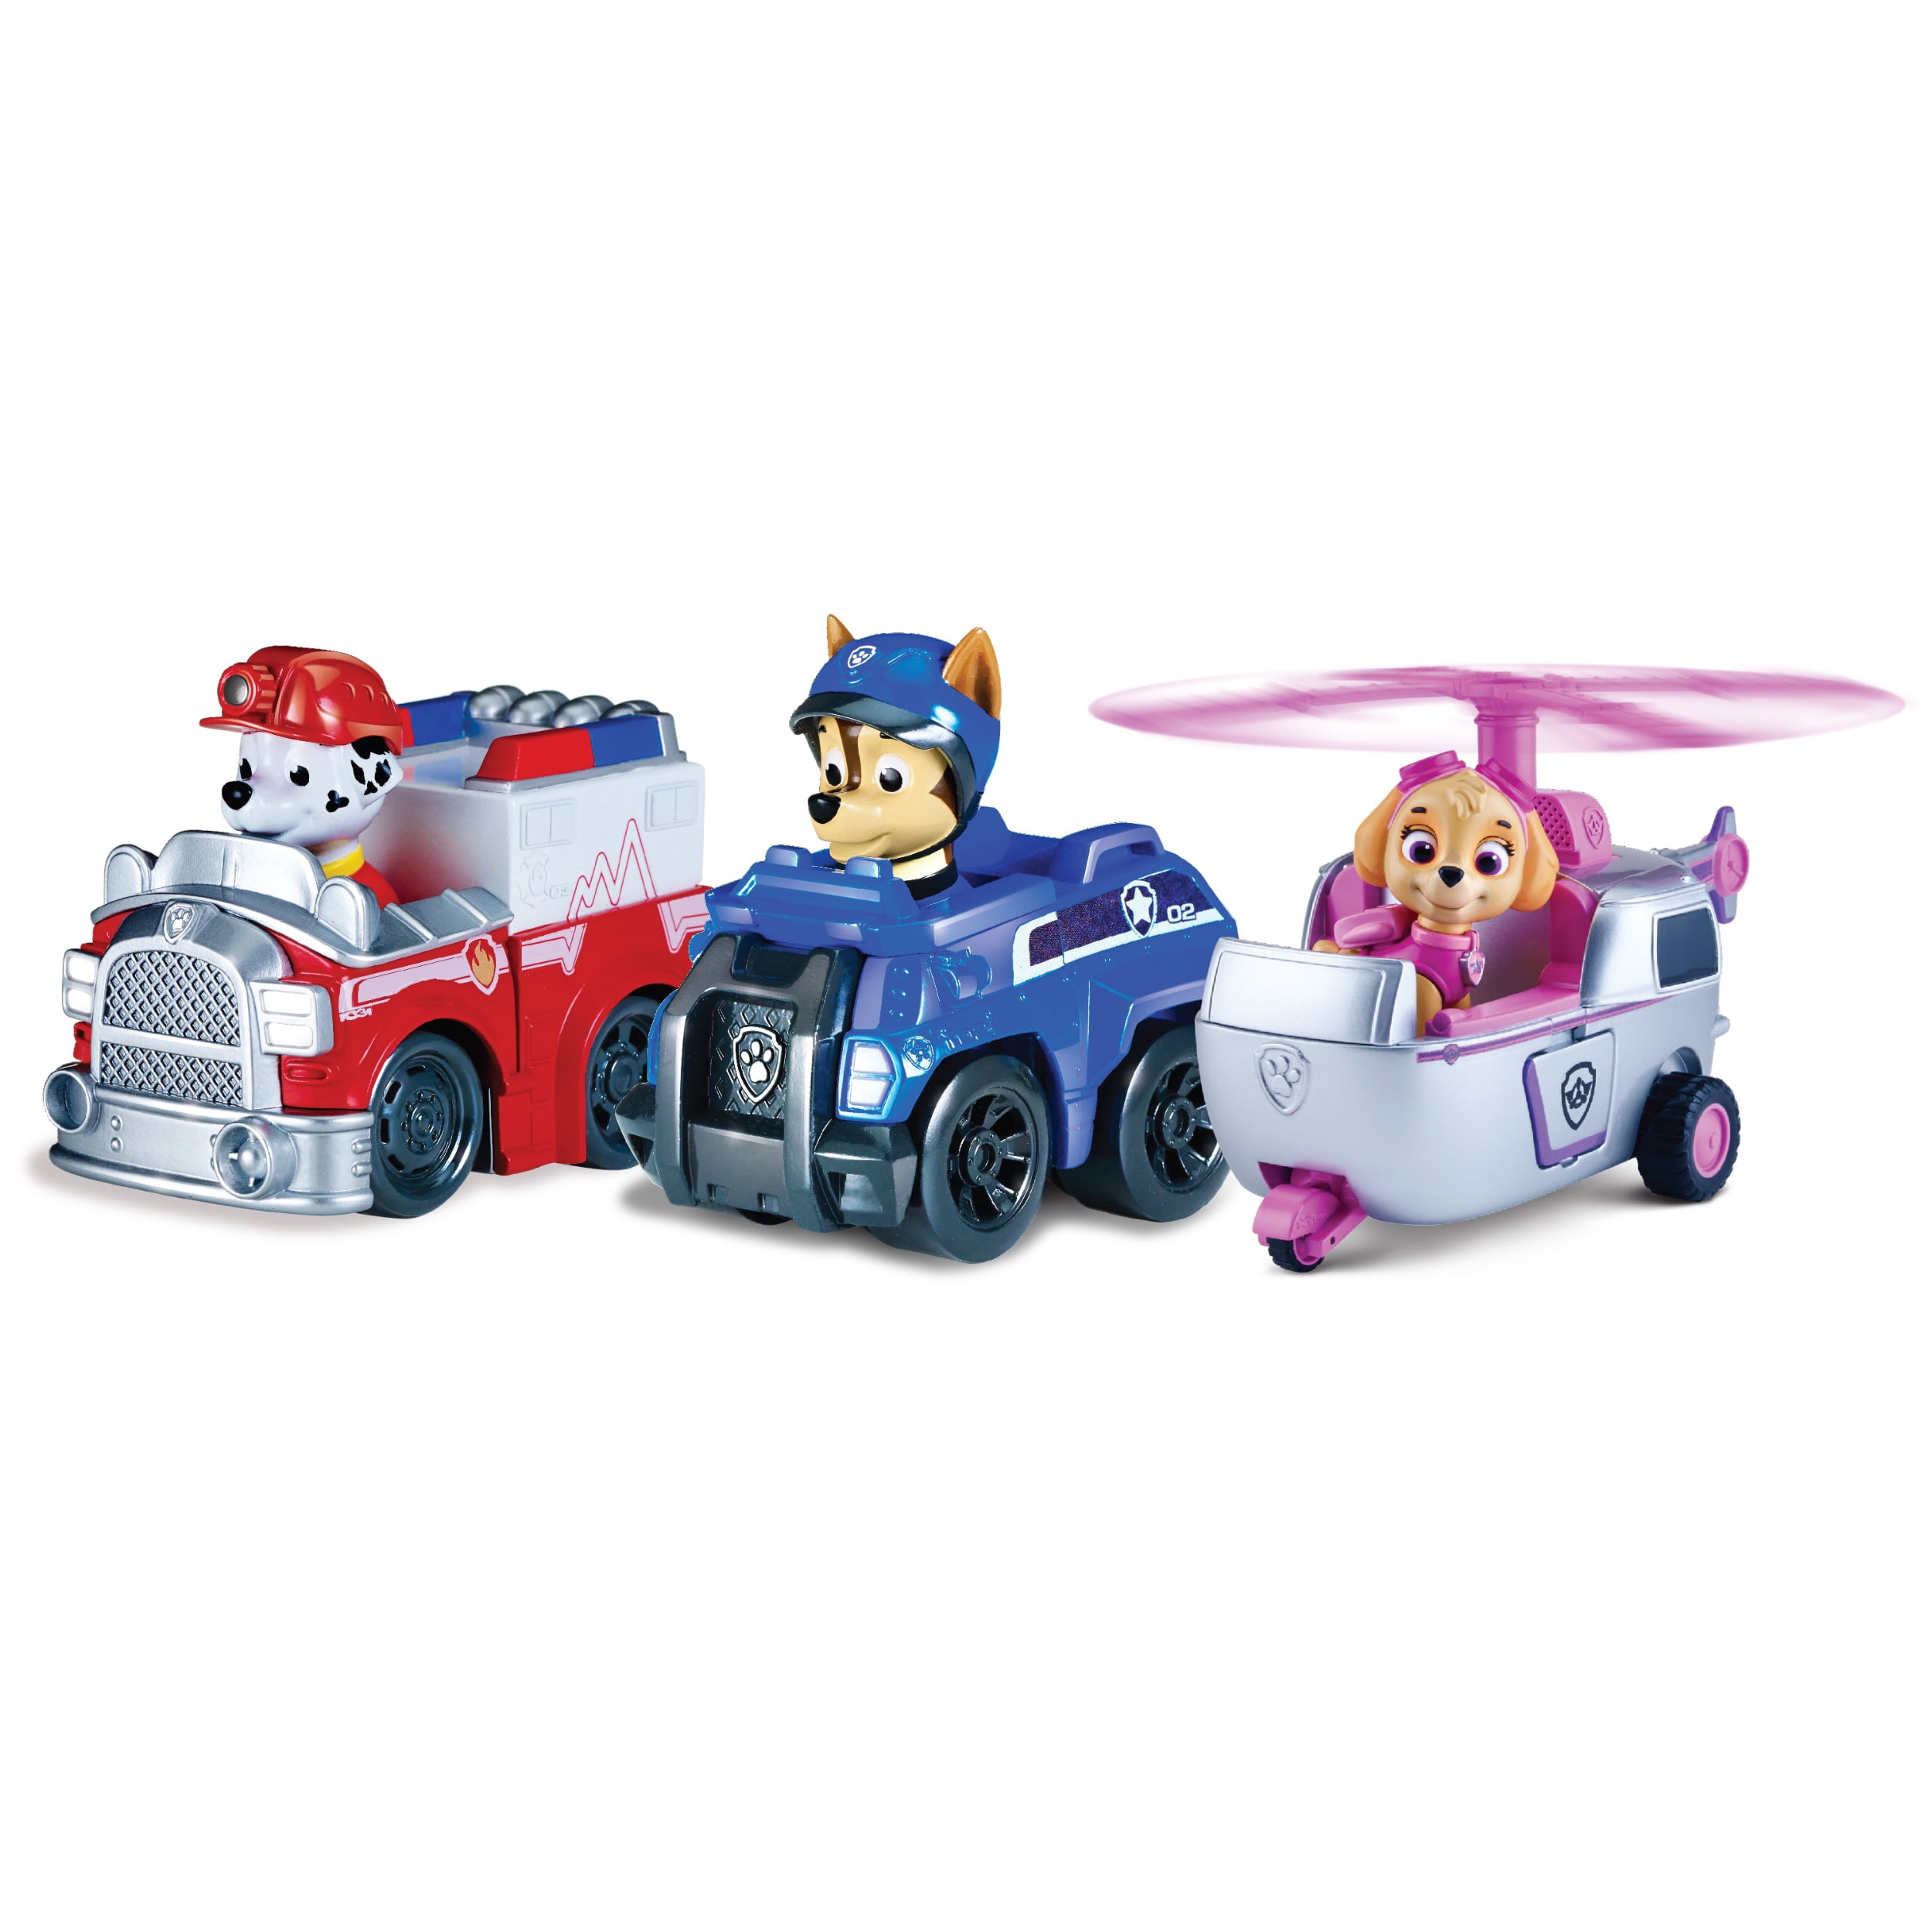 Paw Patrol toys Ryder's Rescue ATV Vehicle and Figure figures toy Puppy Dog Toys 